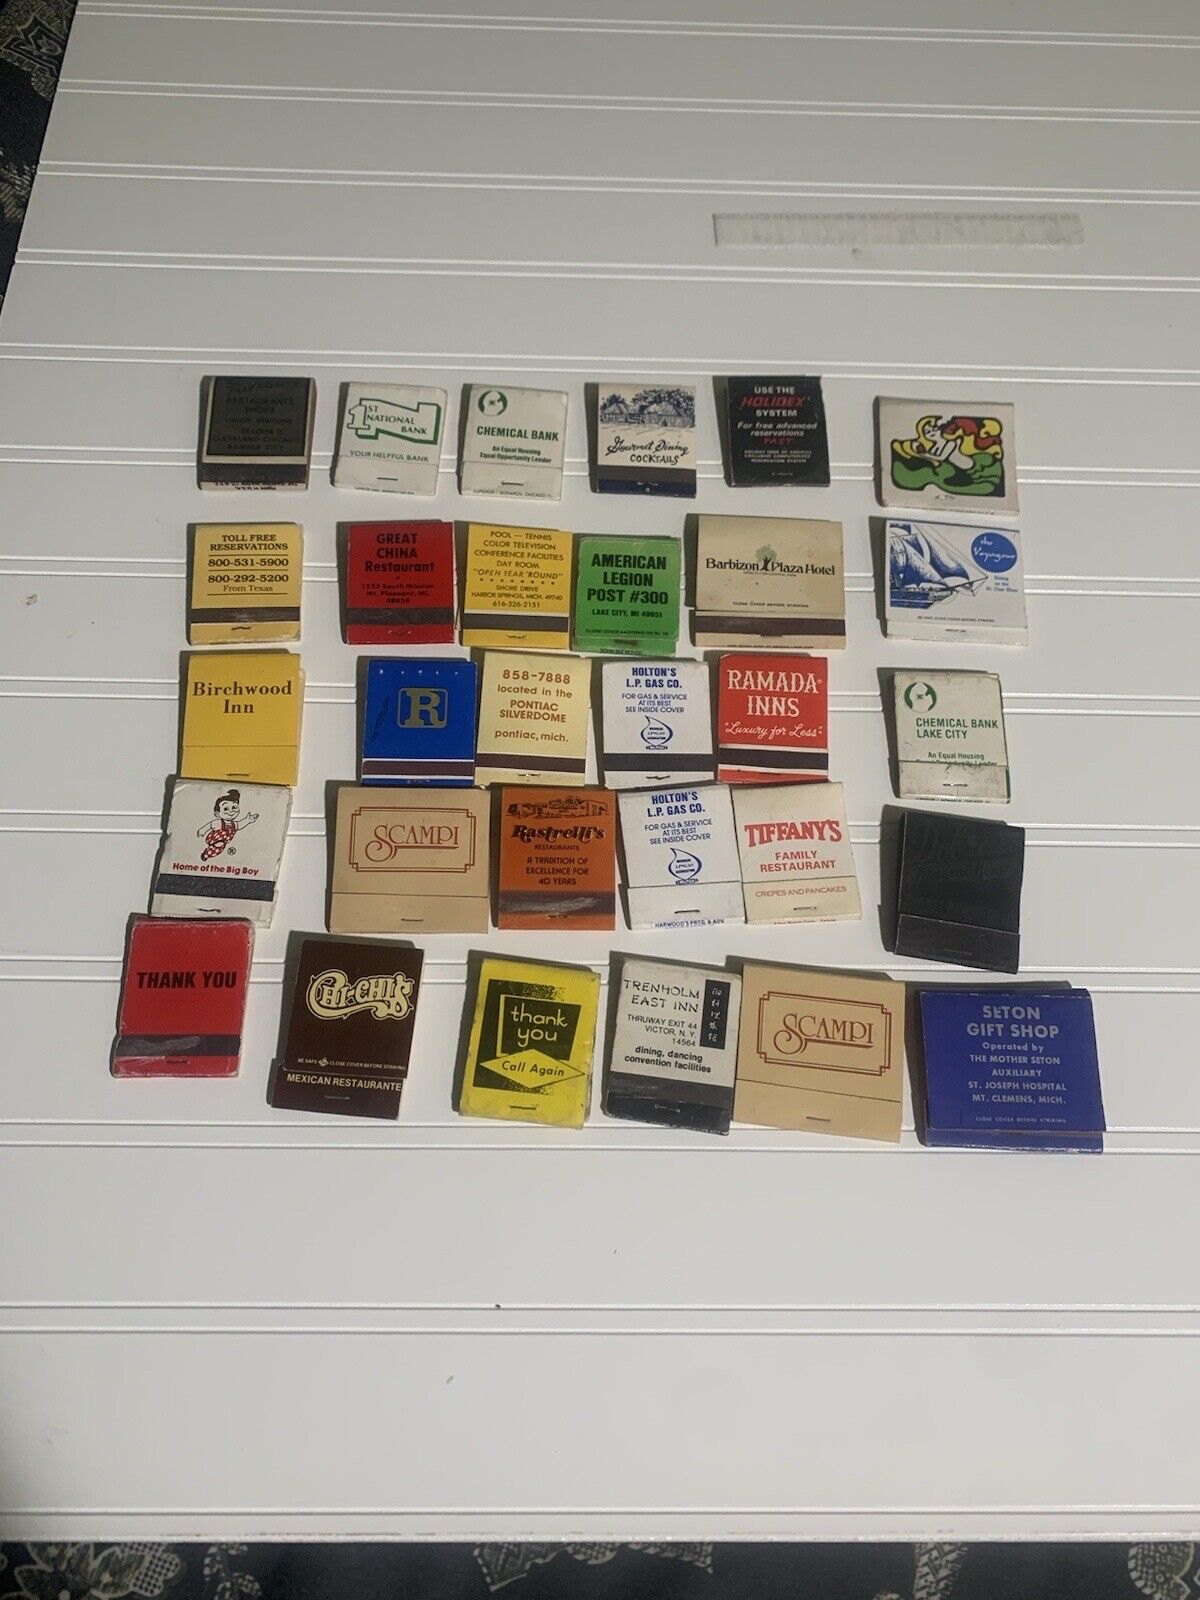 VTG Matchbooks & Boxes w/Matches Lot of 30 Random Pulled Assorted Advertising